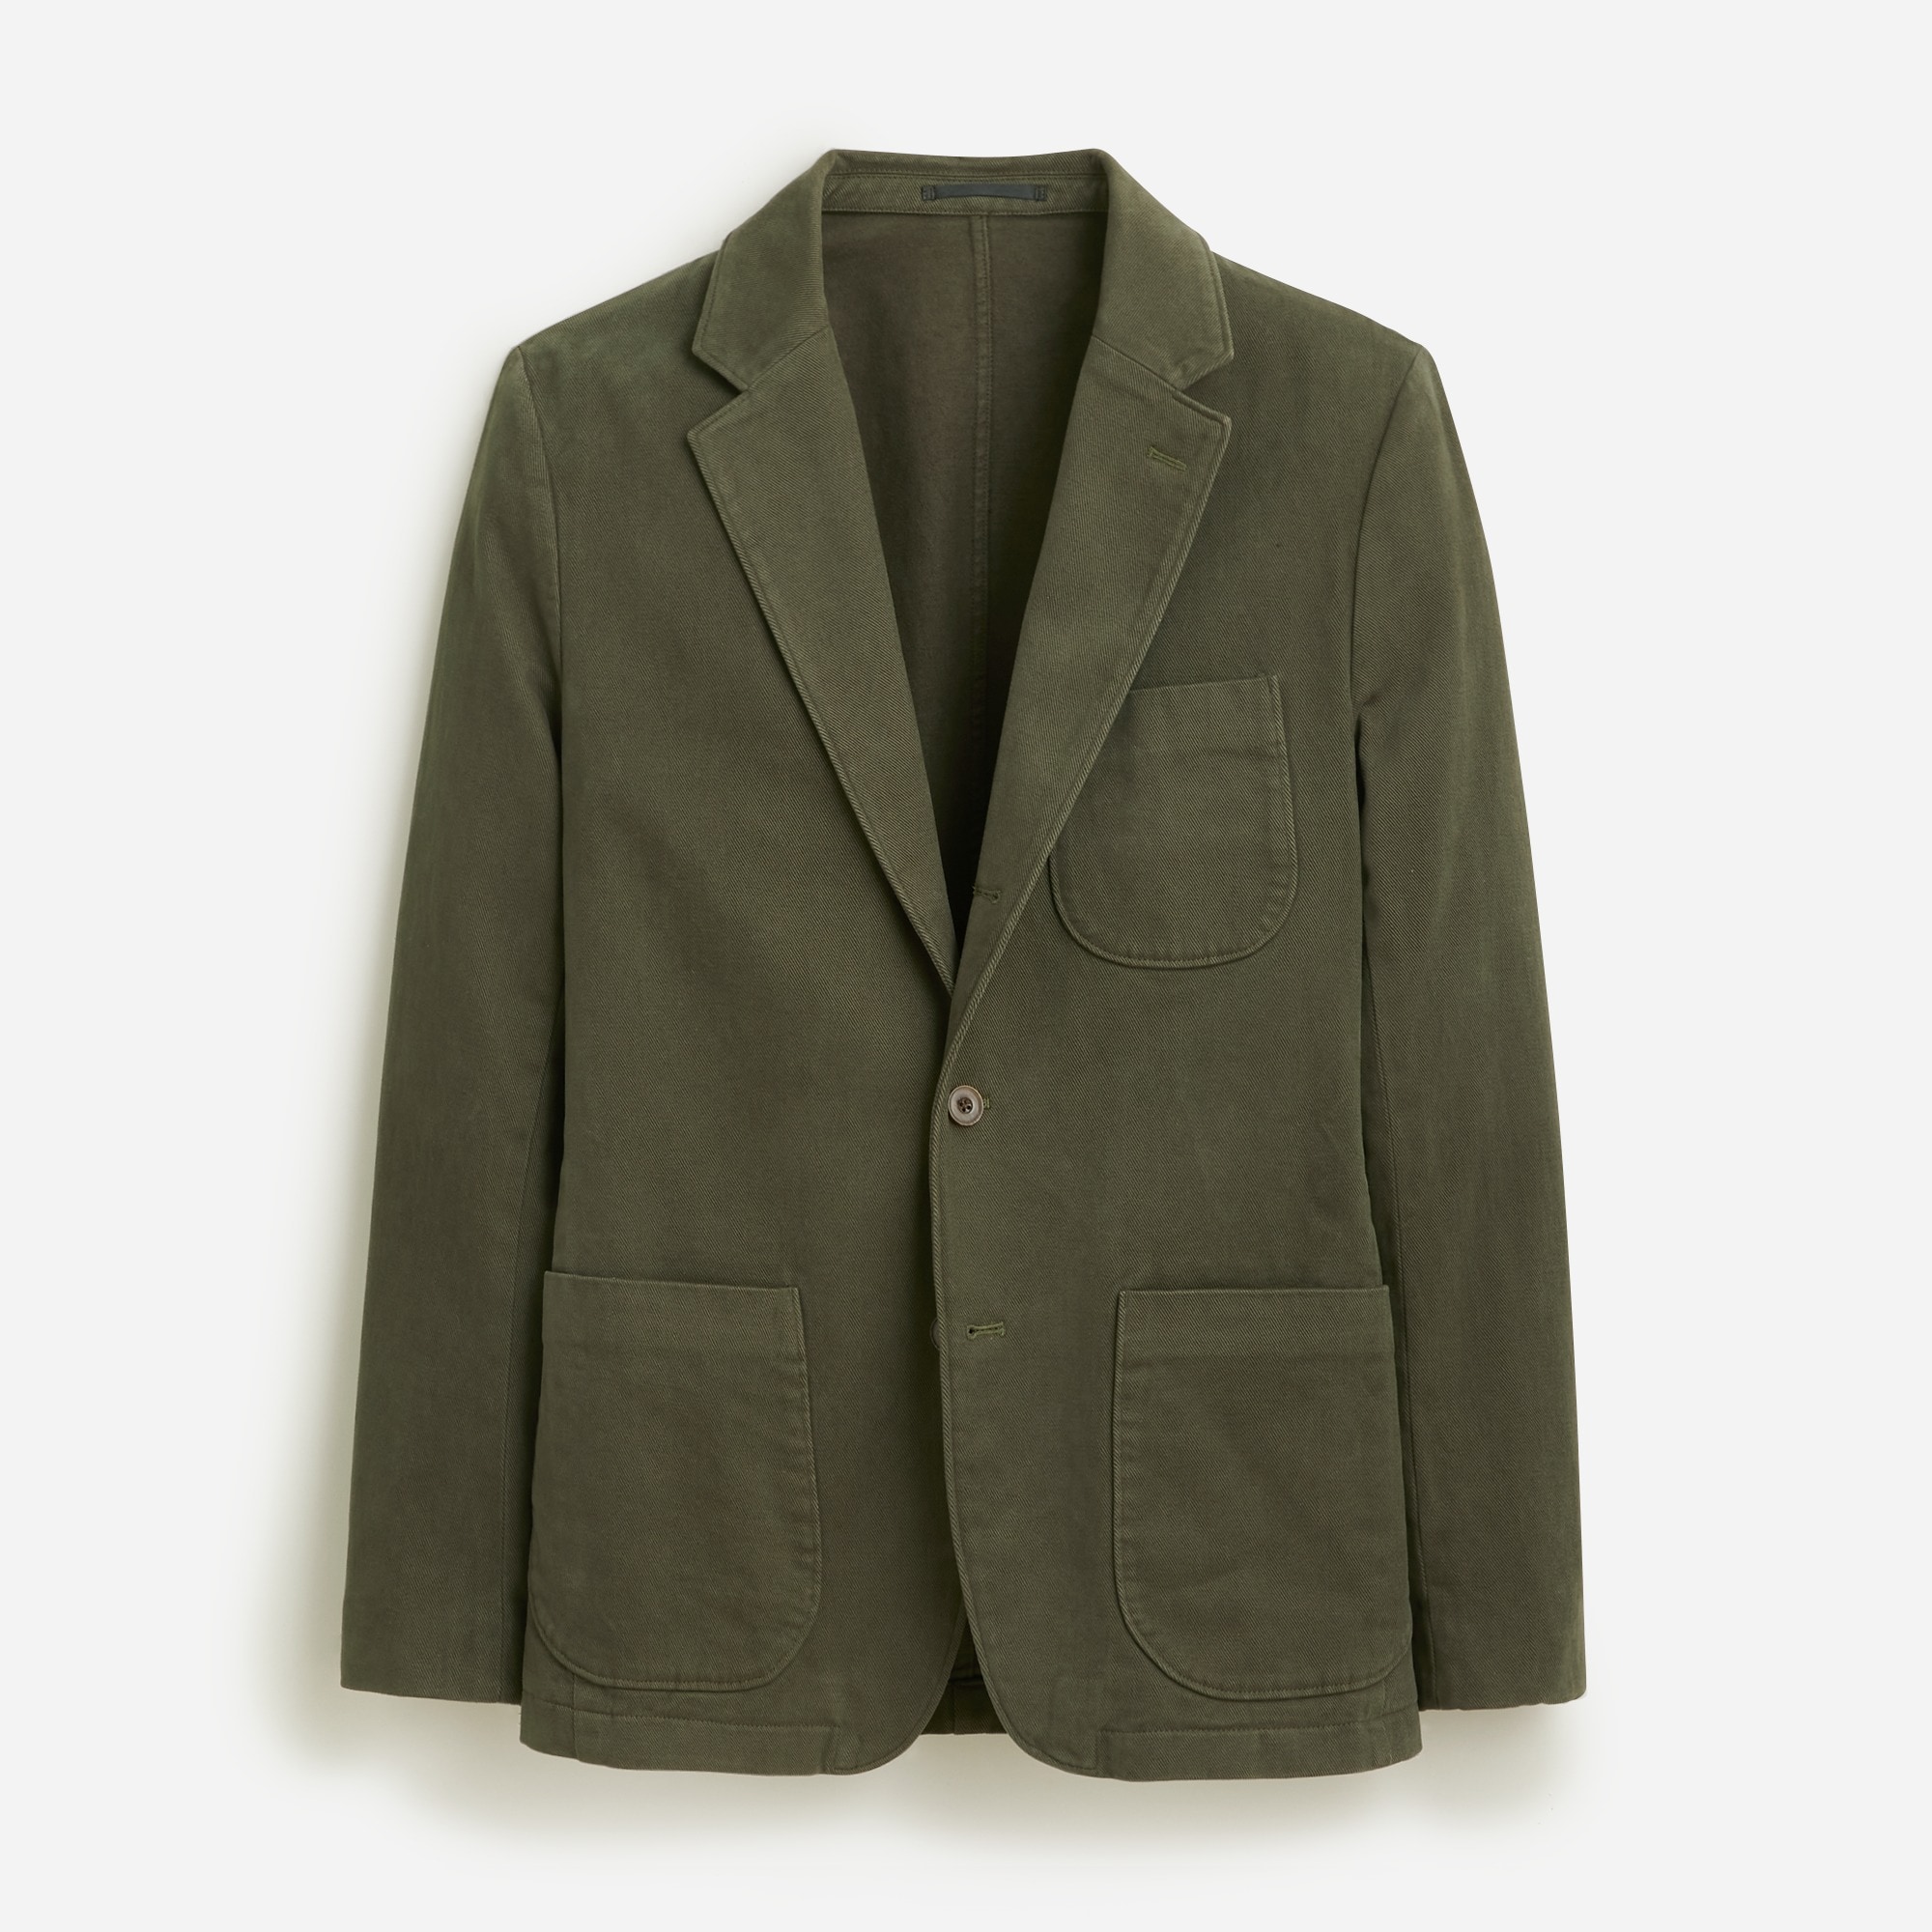 J.Crew: Garment-dyed Suit Jacket In Italian Cotton Drill For Men